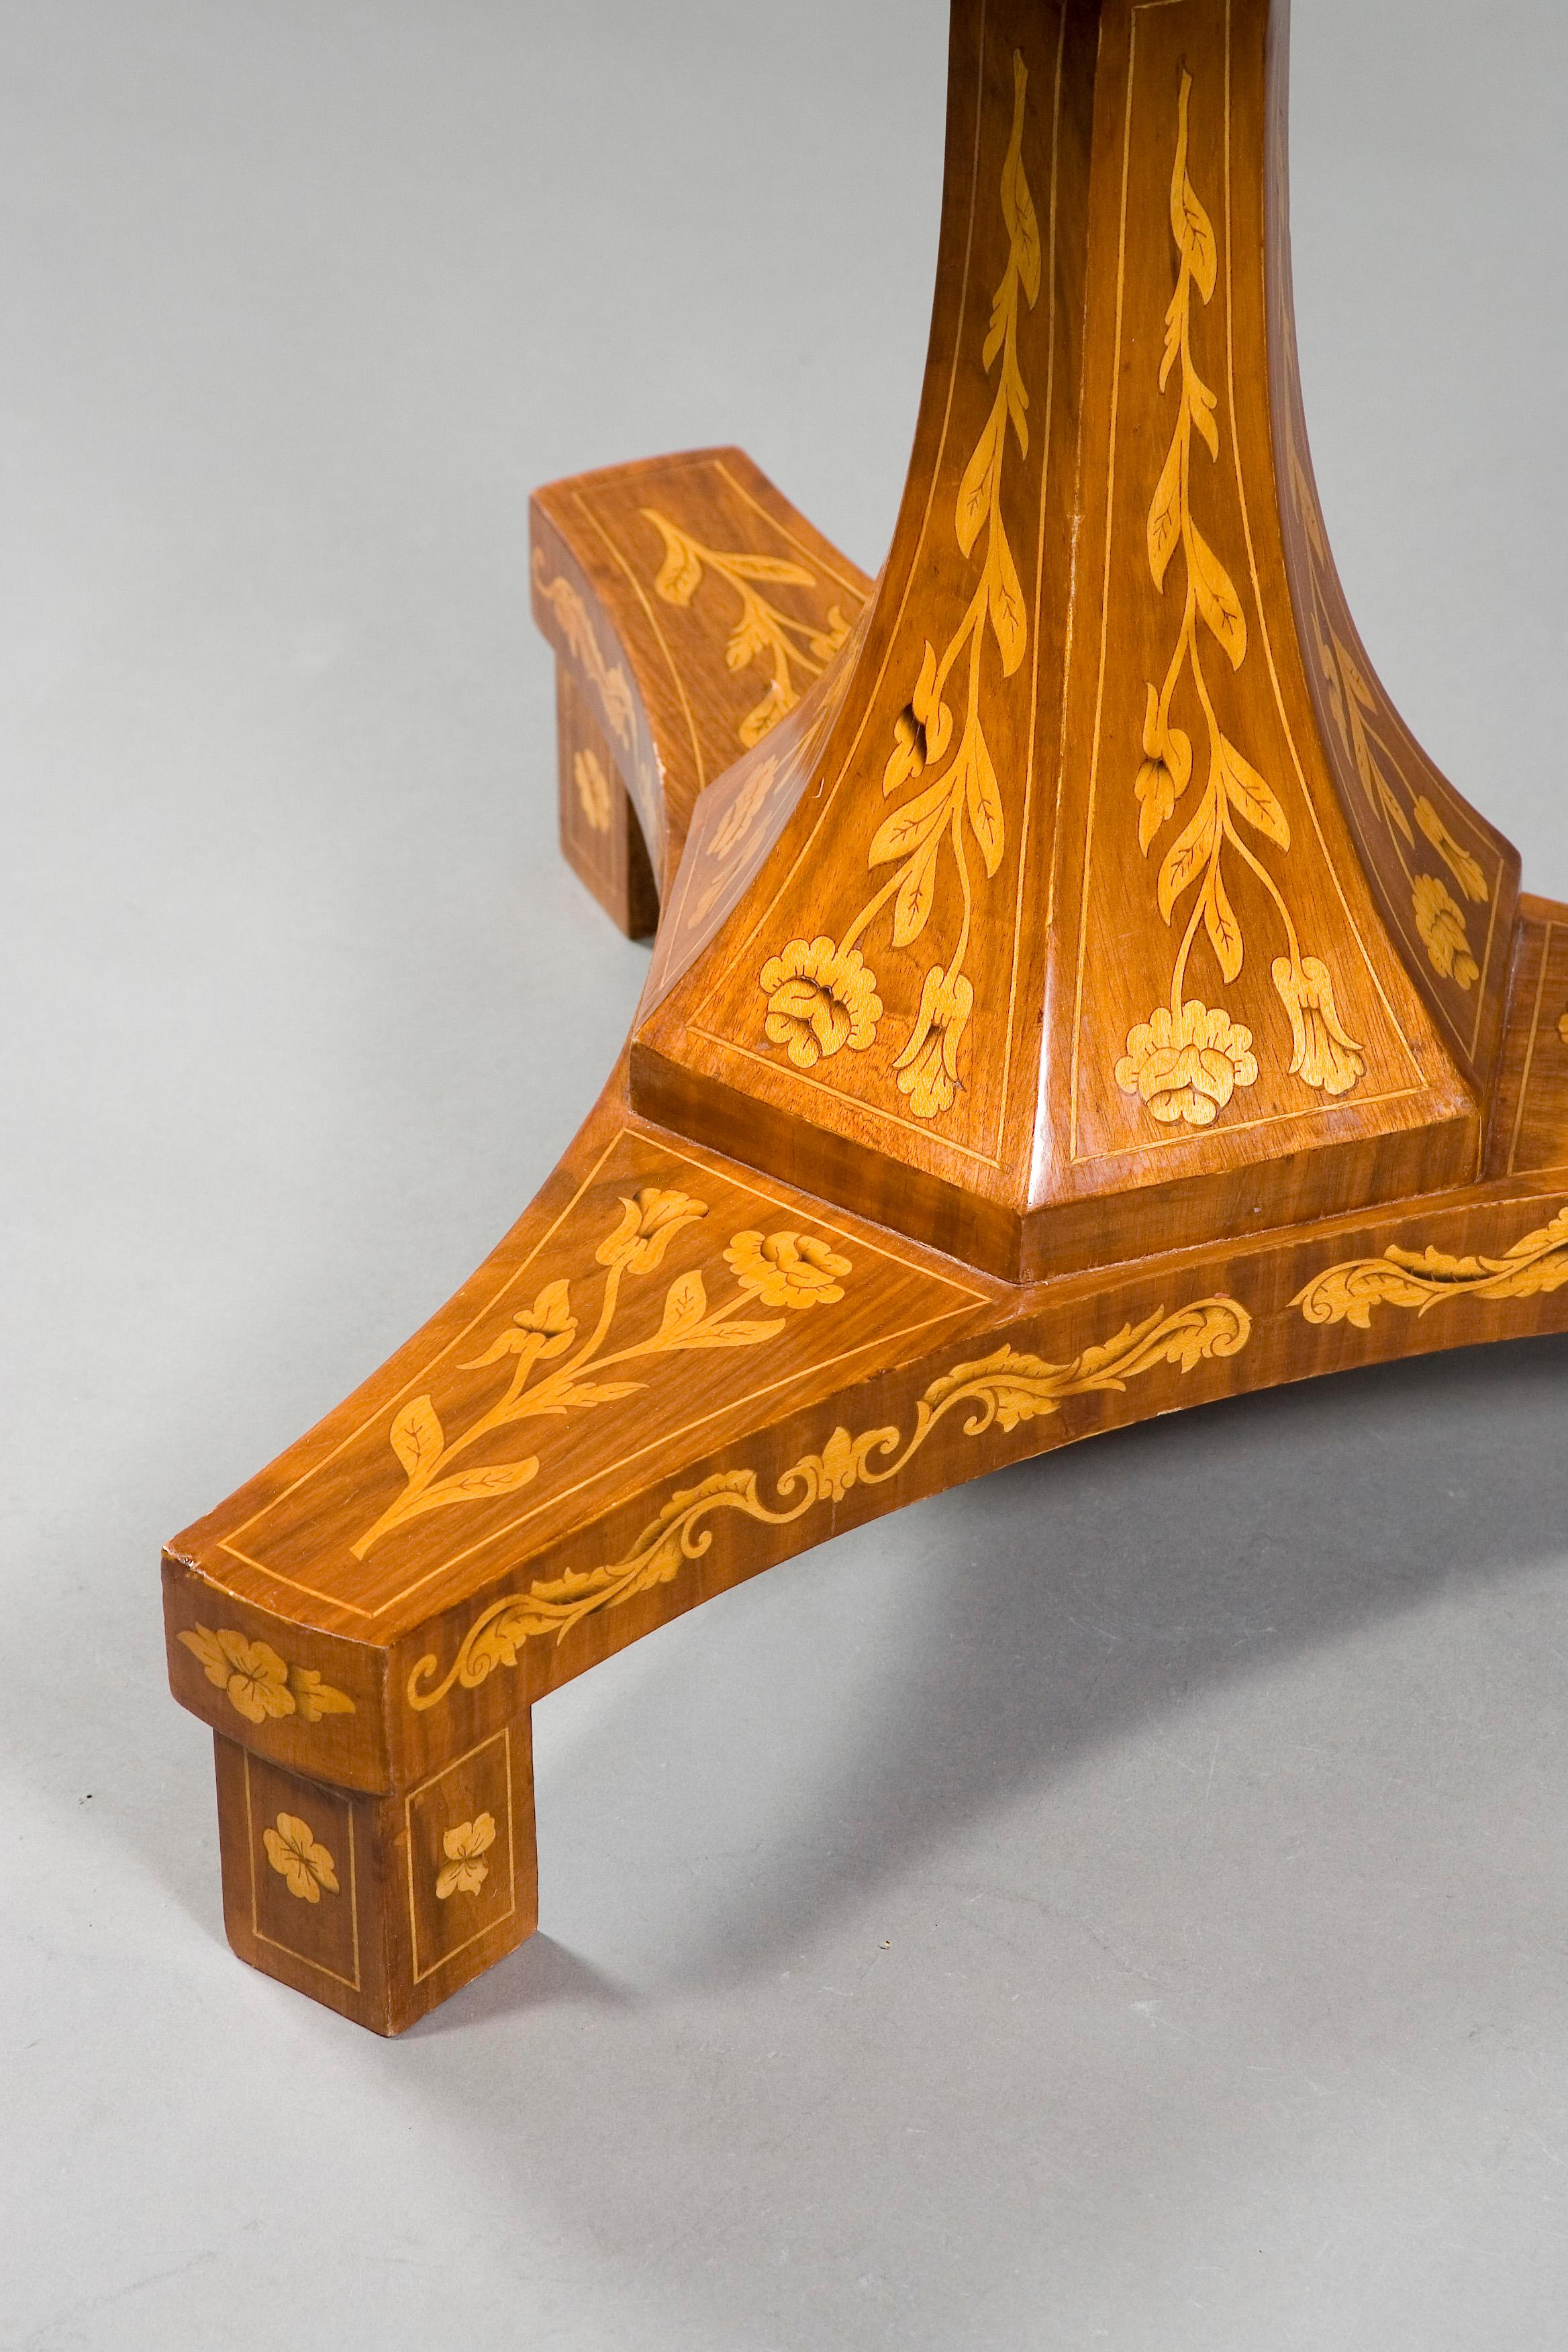 20th Century High Quality Marquetry Table in the Biedermeier Style